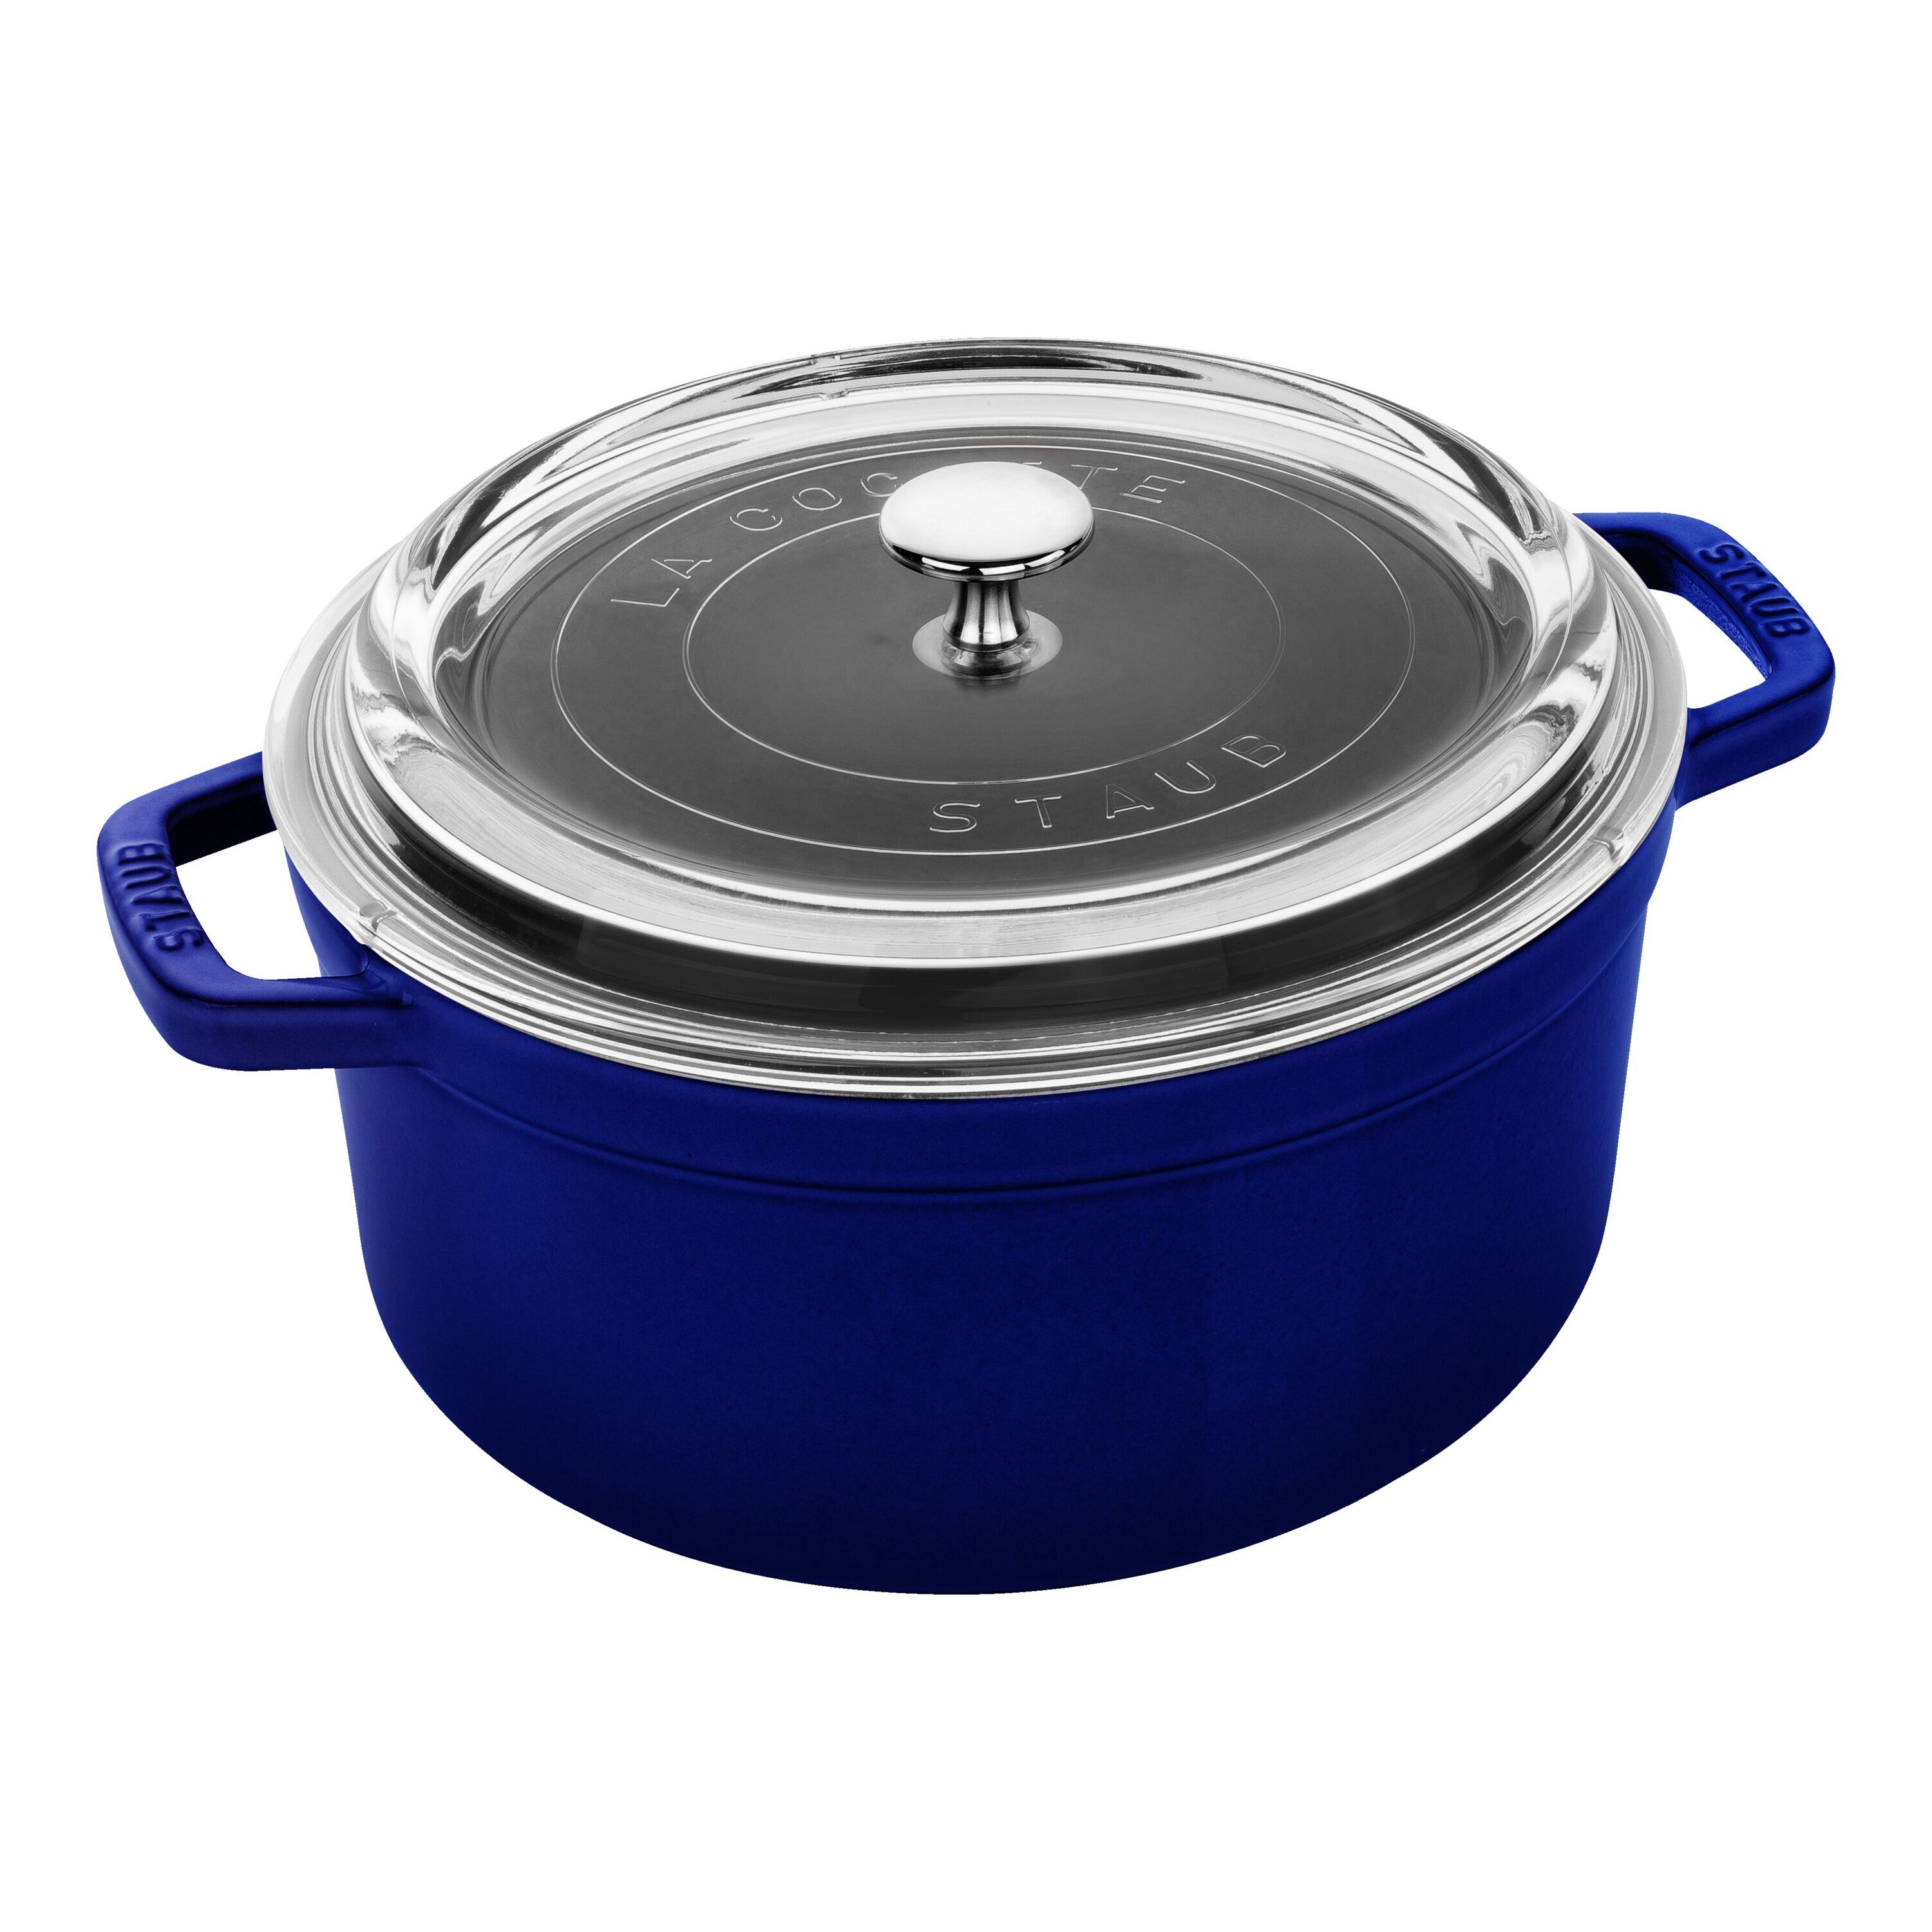 Buy Staub Cast Iron Cocotte with glass lid | ZWILLING.COM